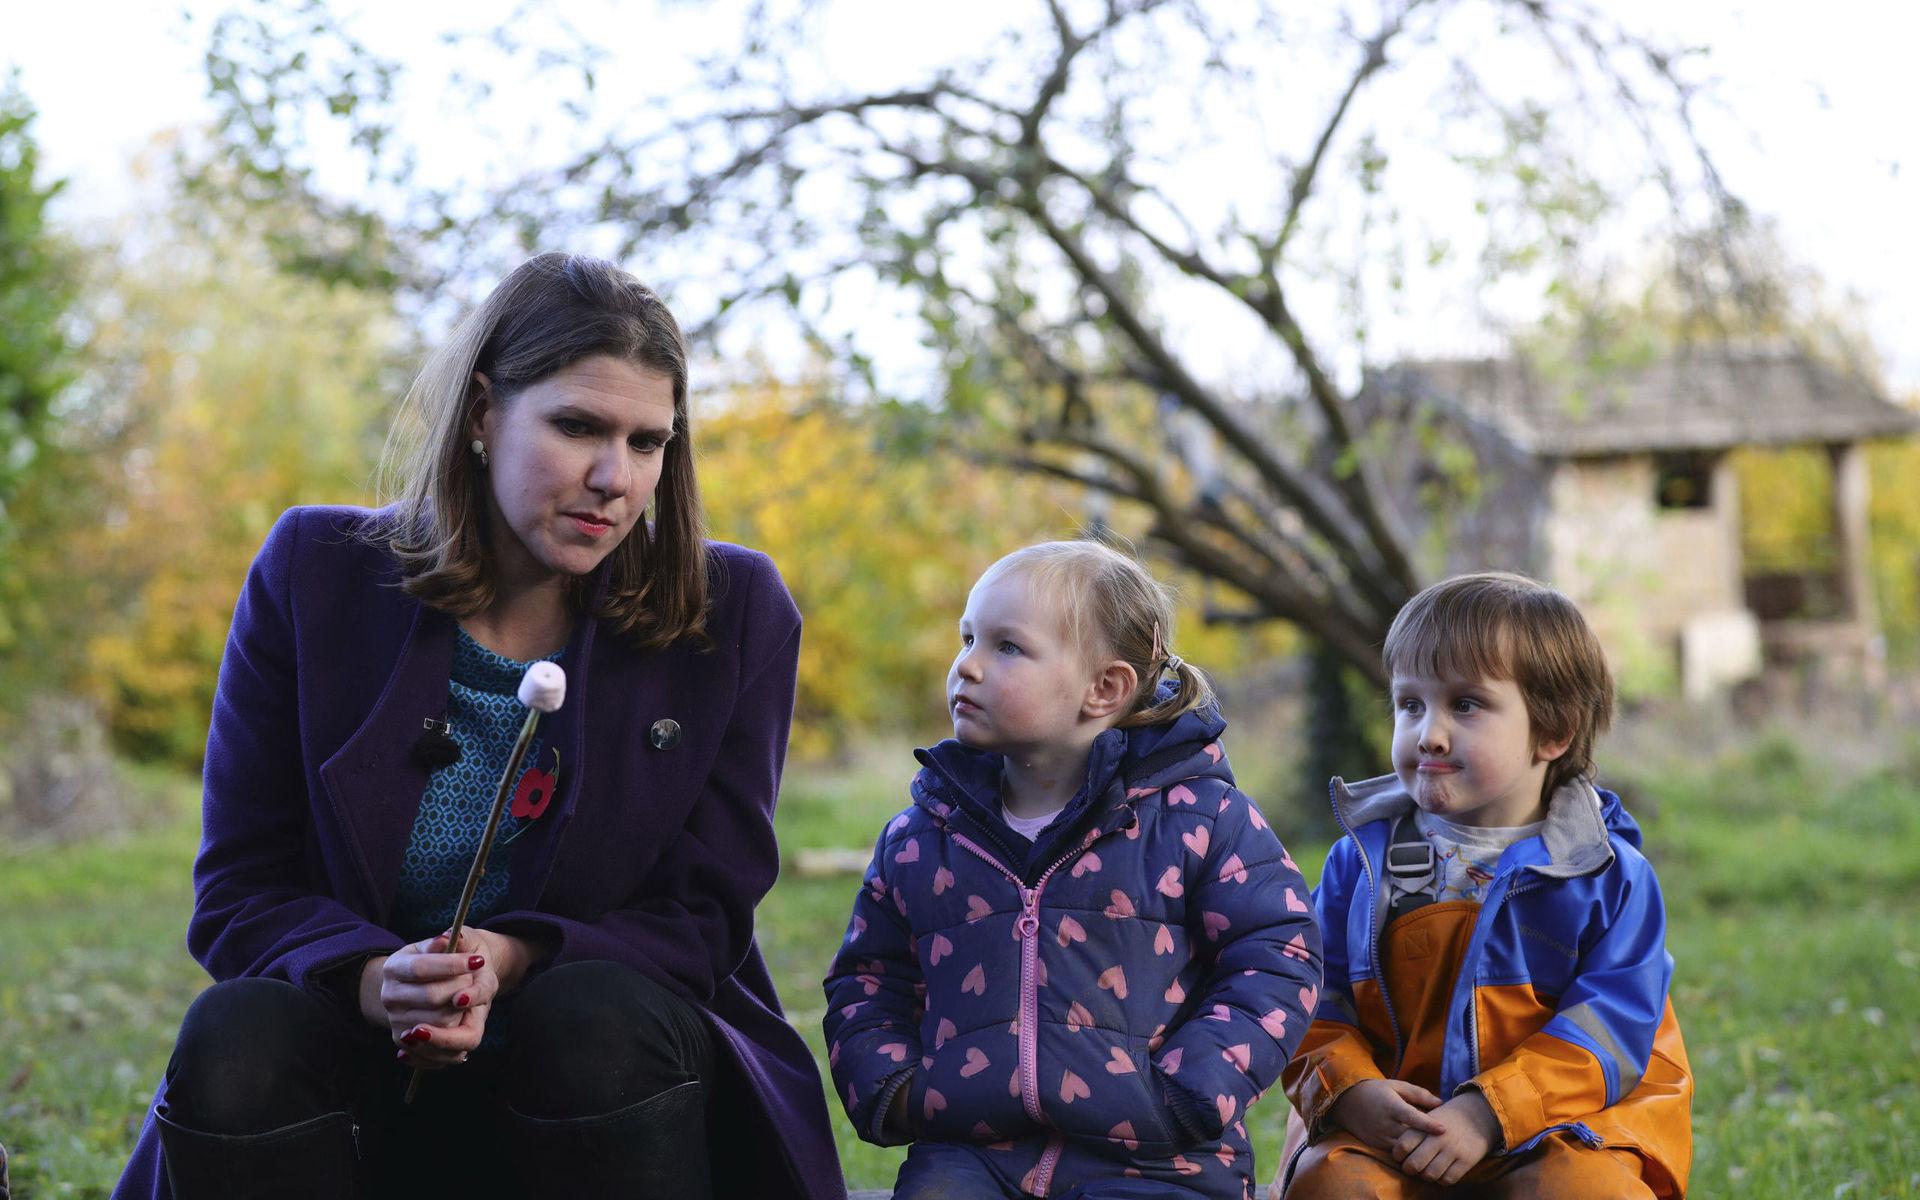 Britain&apos;s Liberal Democrats leader Jo Swinson prepares to eat a marshmallow as she sits with children at Free Rangers Nursery in Midsomer Norton for an engagement as part of the General Election campaign trail, in Somerset, England, Thursday, Nov. 7, 2019. Britain goes to the polls on Dec. 12.  (Aaron Chown/PA via AP)  TH805